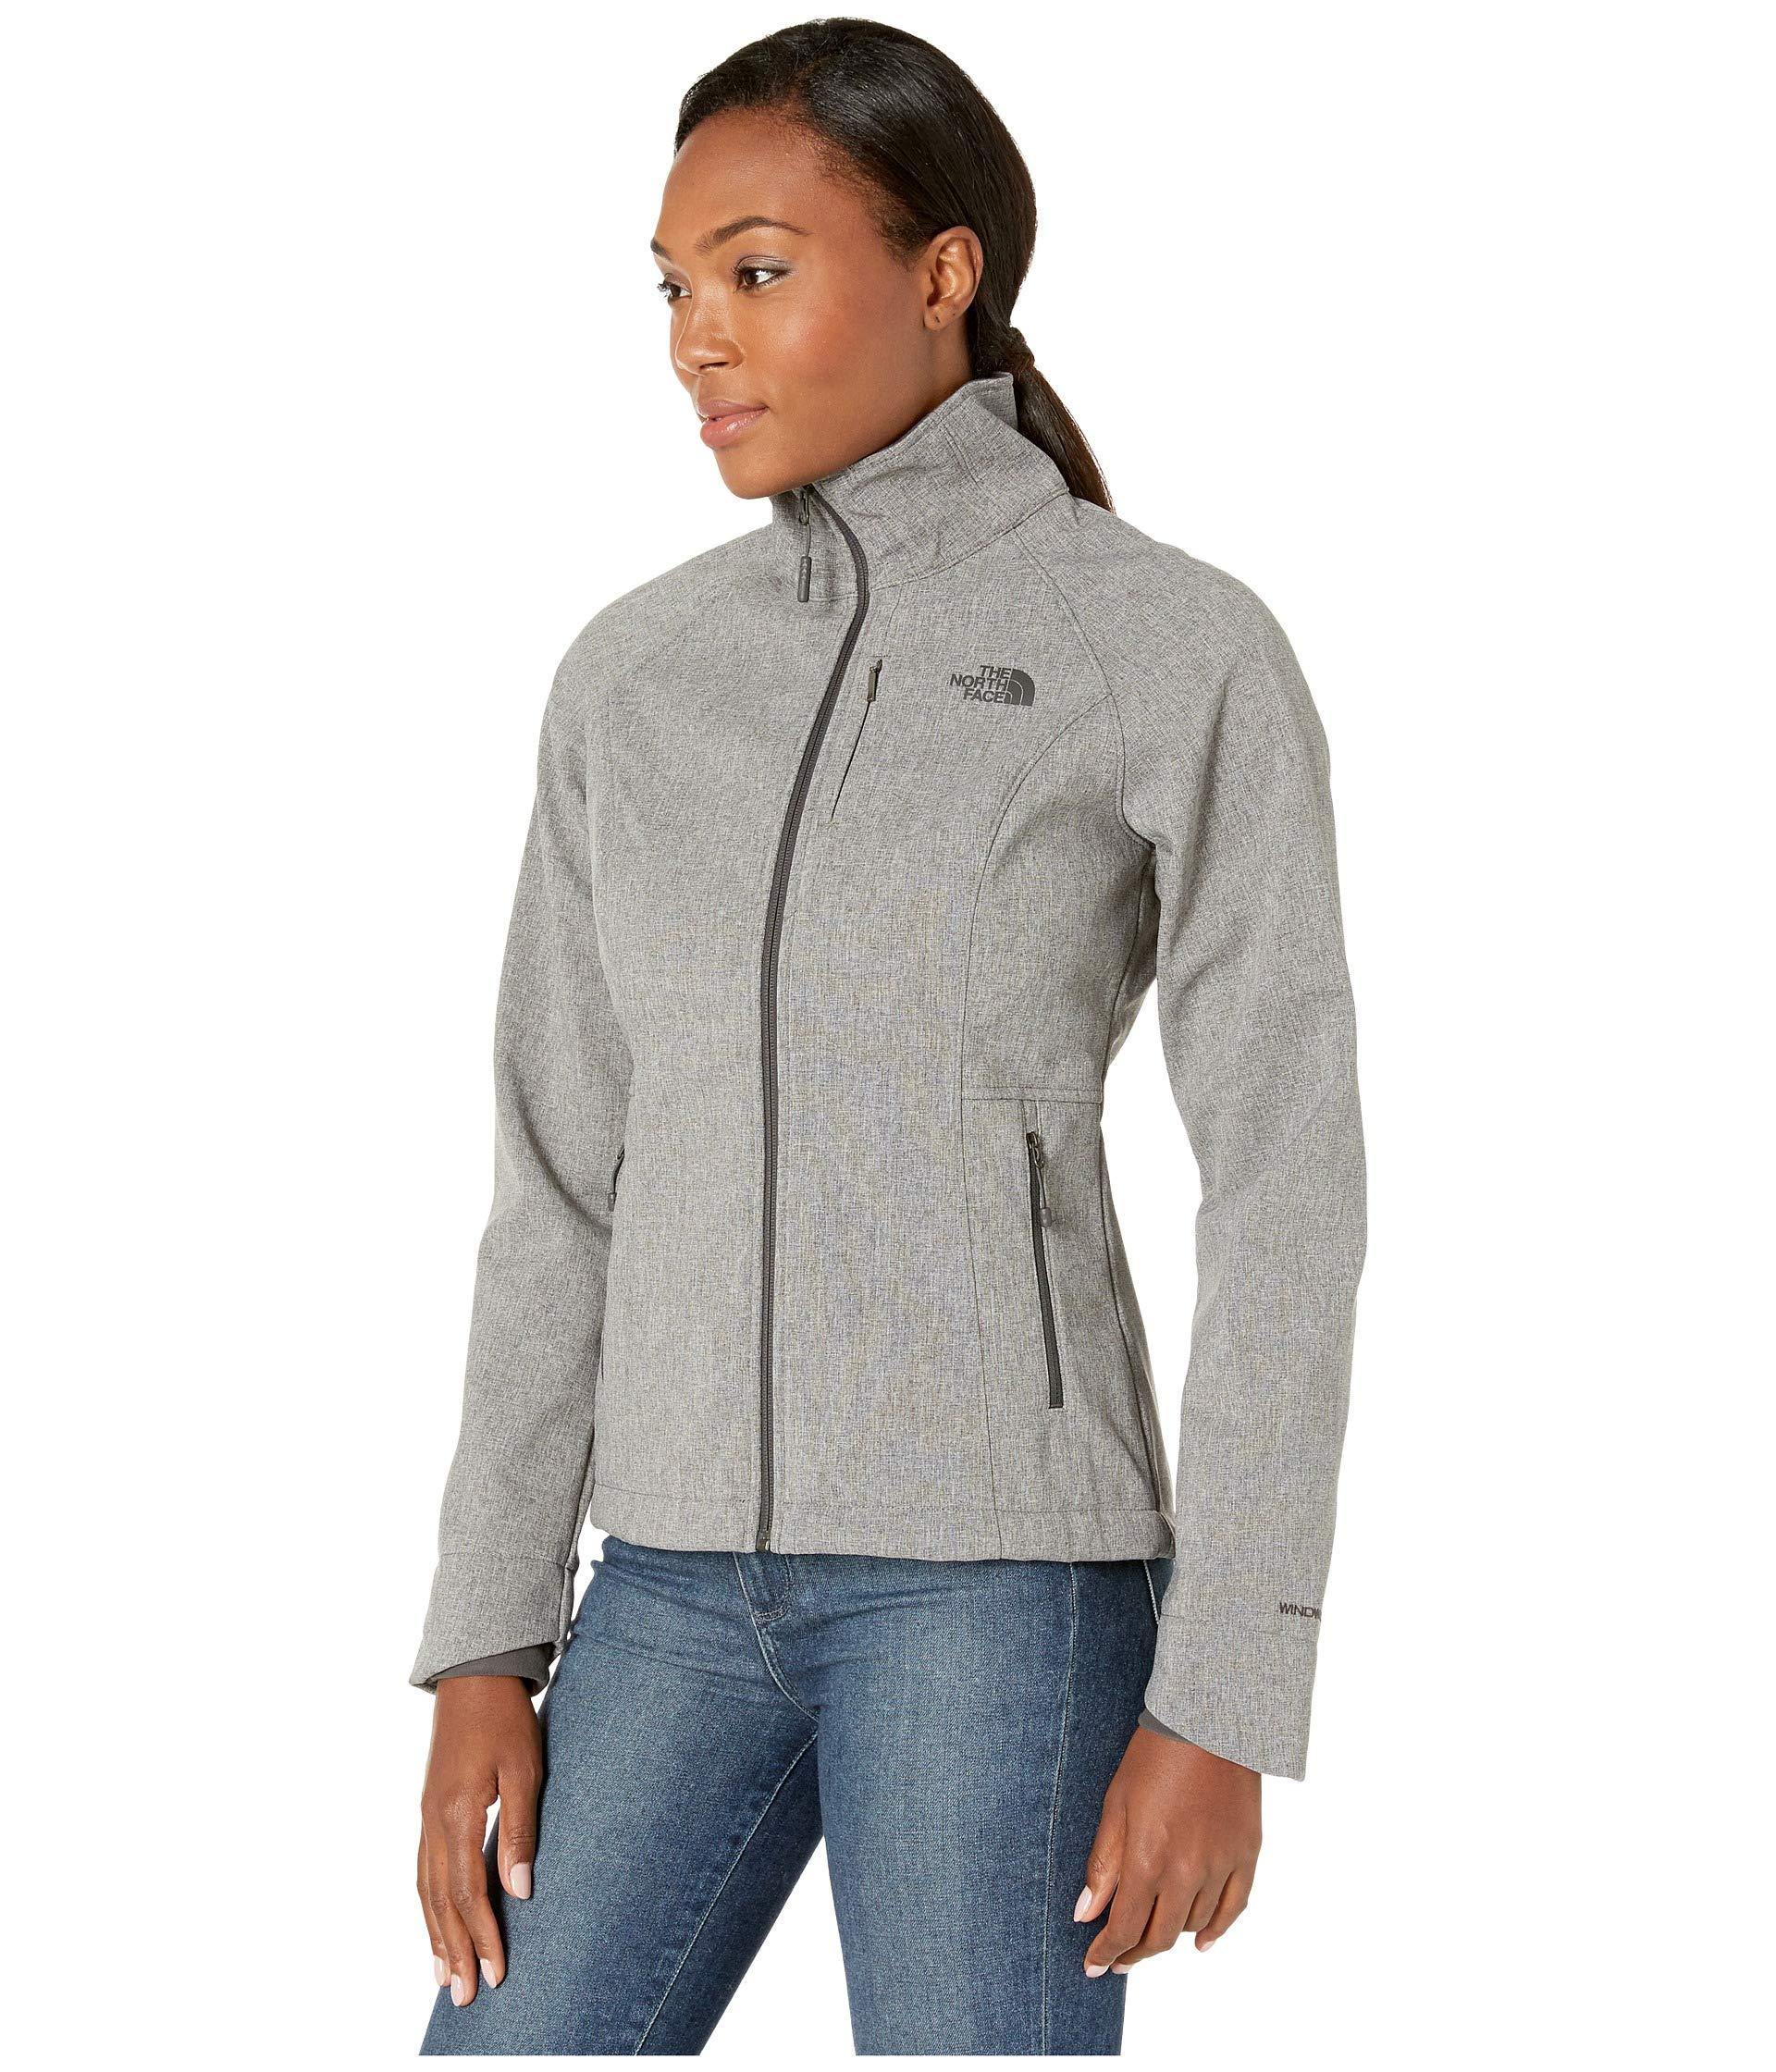 The North Face Fleece Apex Bionic 2 Jacket in Gray - Lyst